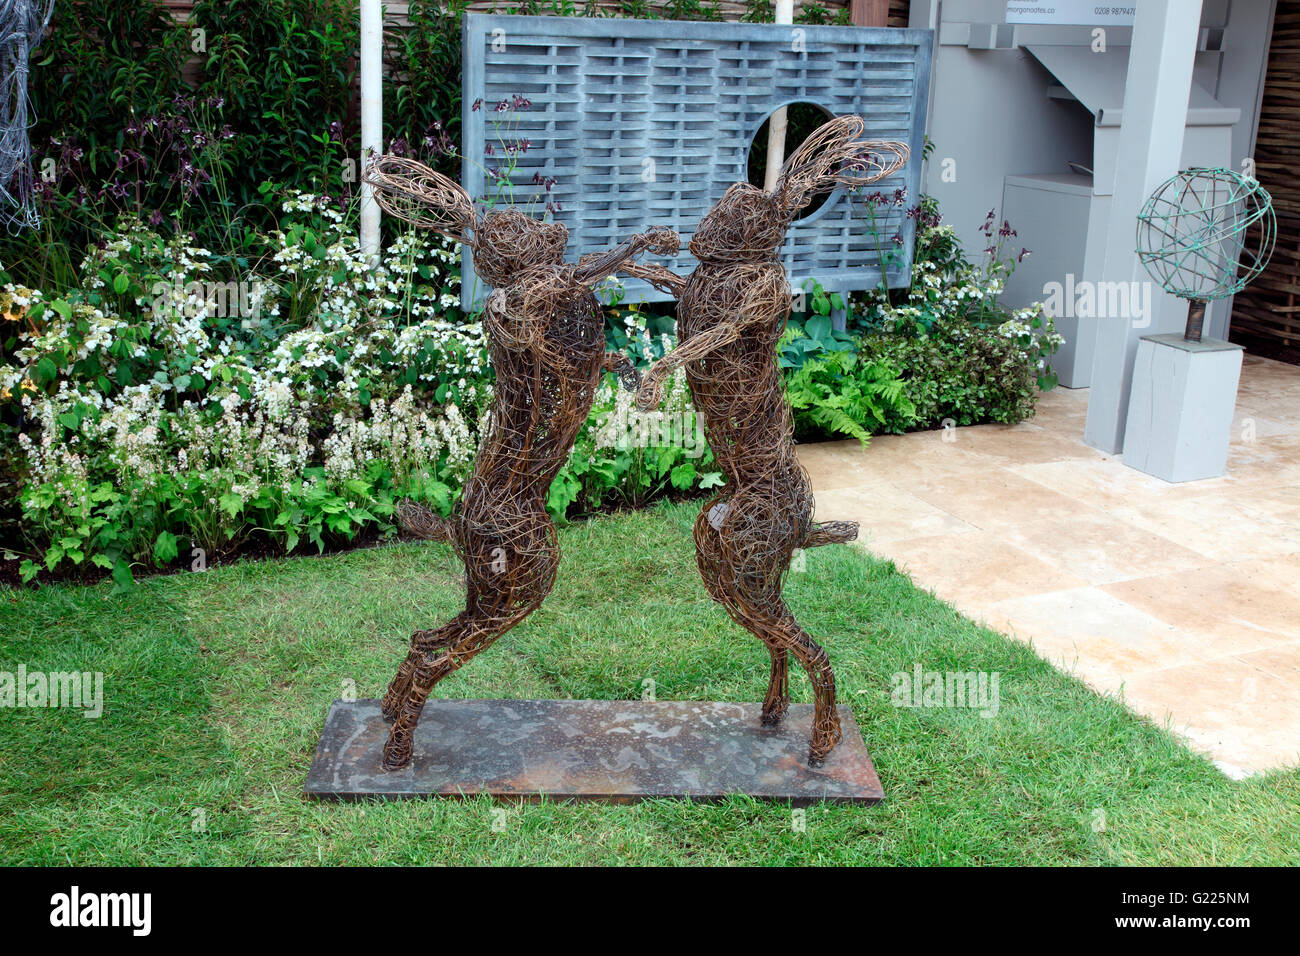 Hare sculptures by Rupert Till at RHS Chelsea Flower Show 2016 Stock Photo